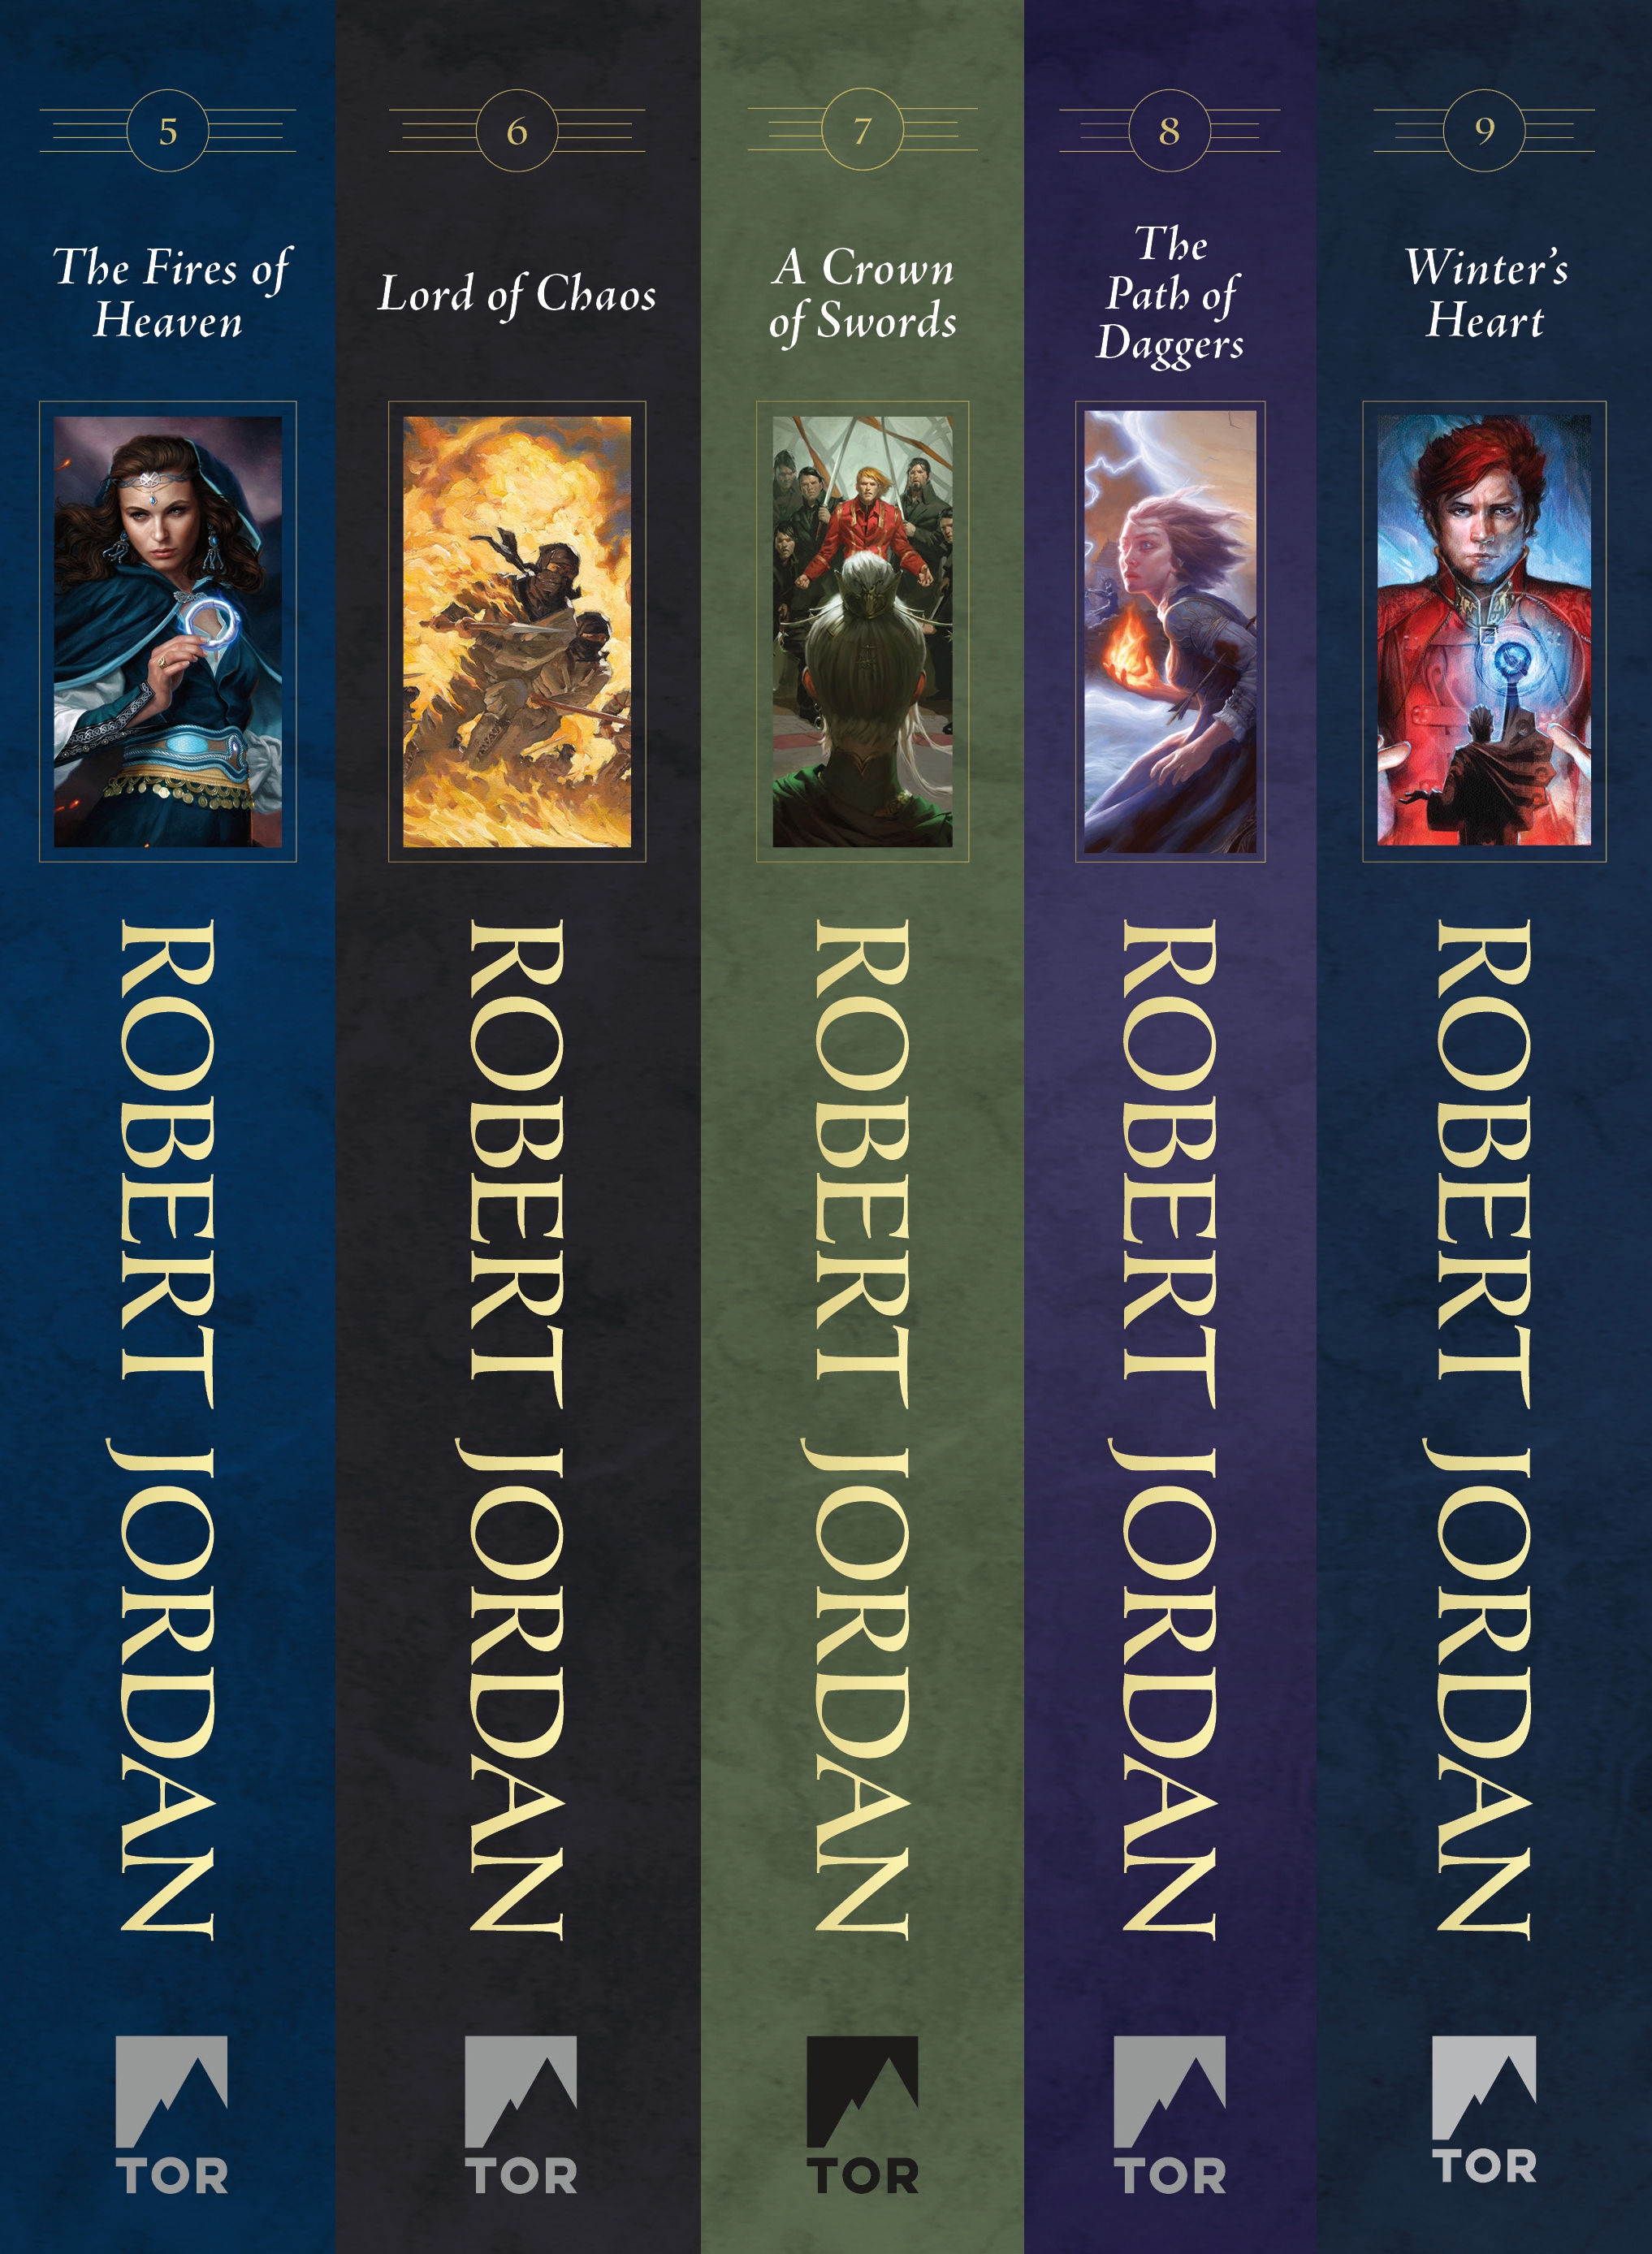 The Wheel of Time, Books 5-9 : (The Fires of Heaven, Lord of Chaos, A Crown of Swords, The Path of Daggers, Winter's Heart) by Robert Jordan